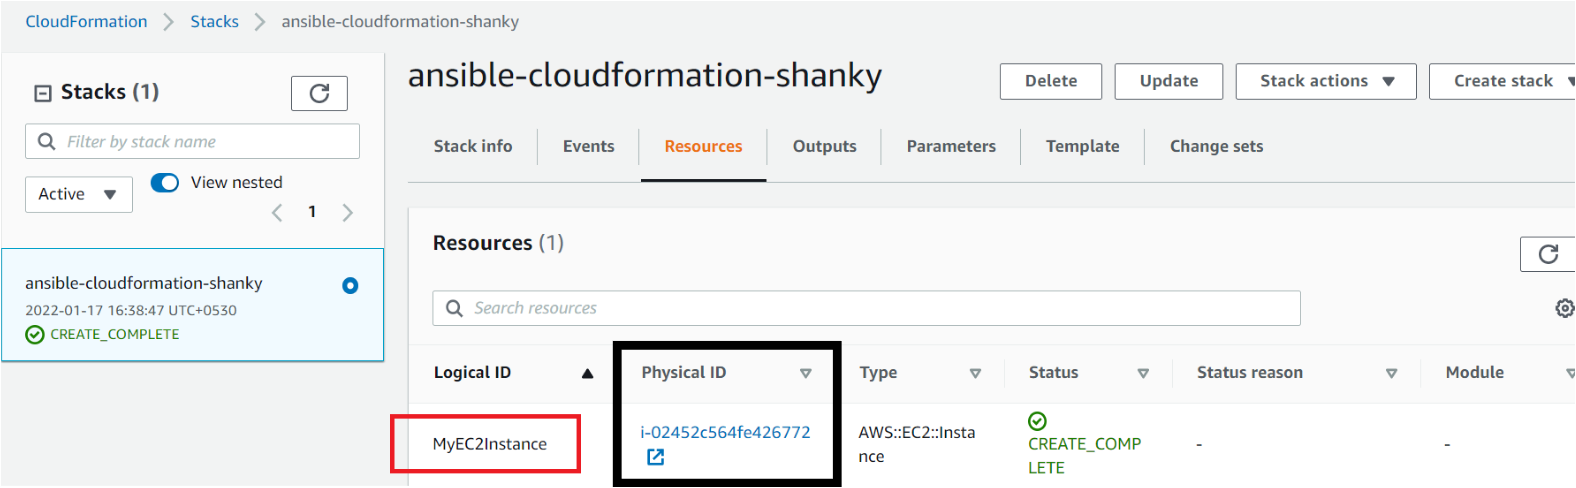 Verifying the CloudFormation Stack in AWS account